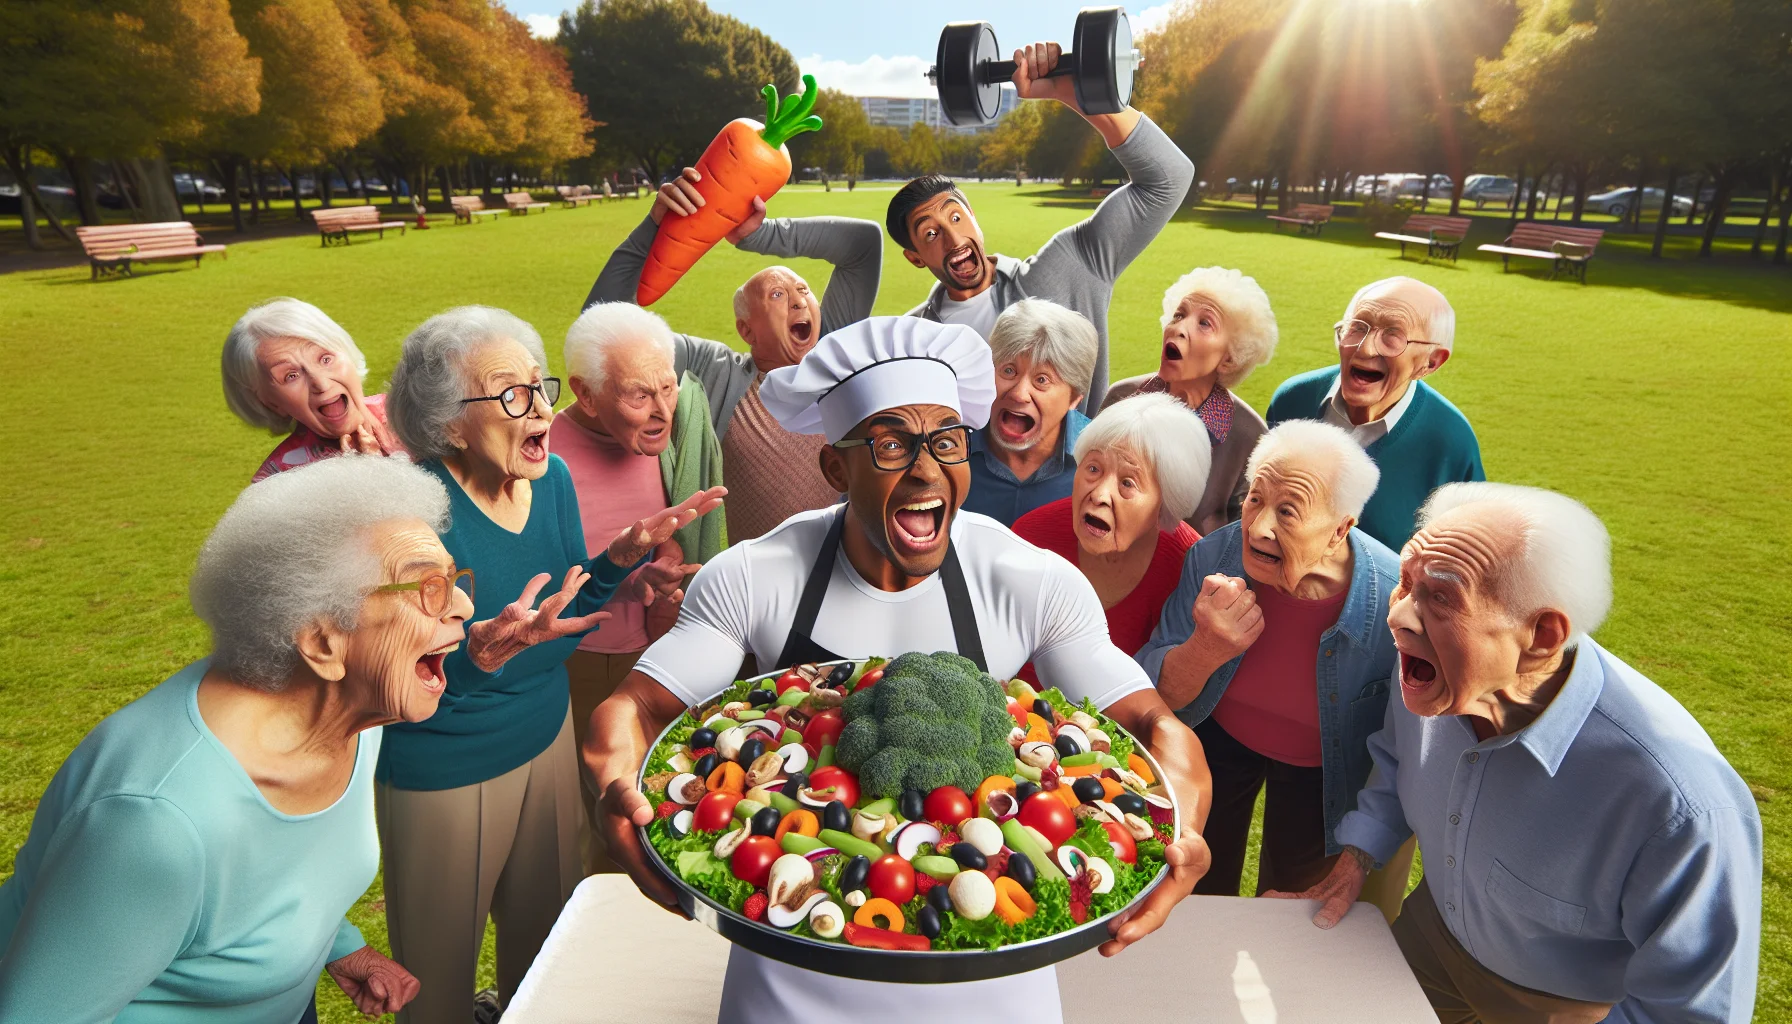 Imagine a hilarious and lifelike scenario playing out at a lively senior citizen gathering in a spacious, sunlit park. A group of elderly individuals of diverse descents like Hispanic, Caucasian, Black, South Asian, and Middle-Eastern are energetically involved in a passionate discussion about their diets. A fit South Asian male in a chef's hat dramatically presents a tray of colorful, crunchy, clean food labelled 'Super Salad', evoking an array of exaggerated expressions of delight and horror. A Caucasian female with glasses humorously inspects a broccoli with a magnifying glass. A Black male athlete senior is laughingly trying to lift a giant carrot as if it's a dumbbell.